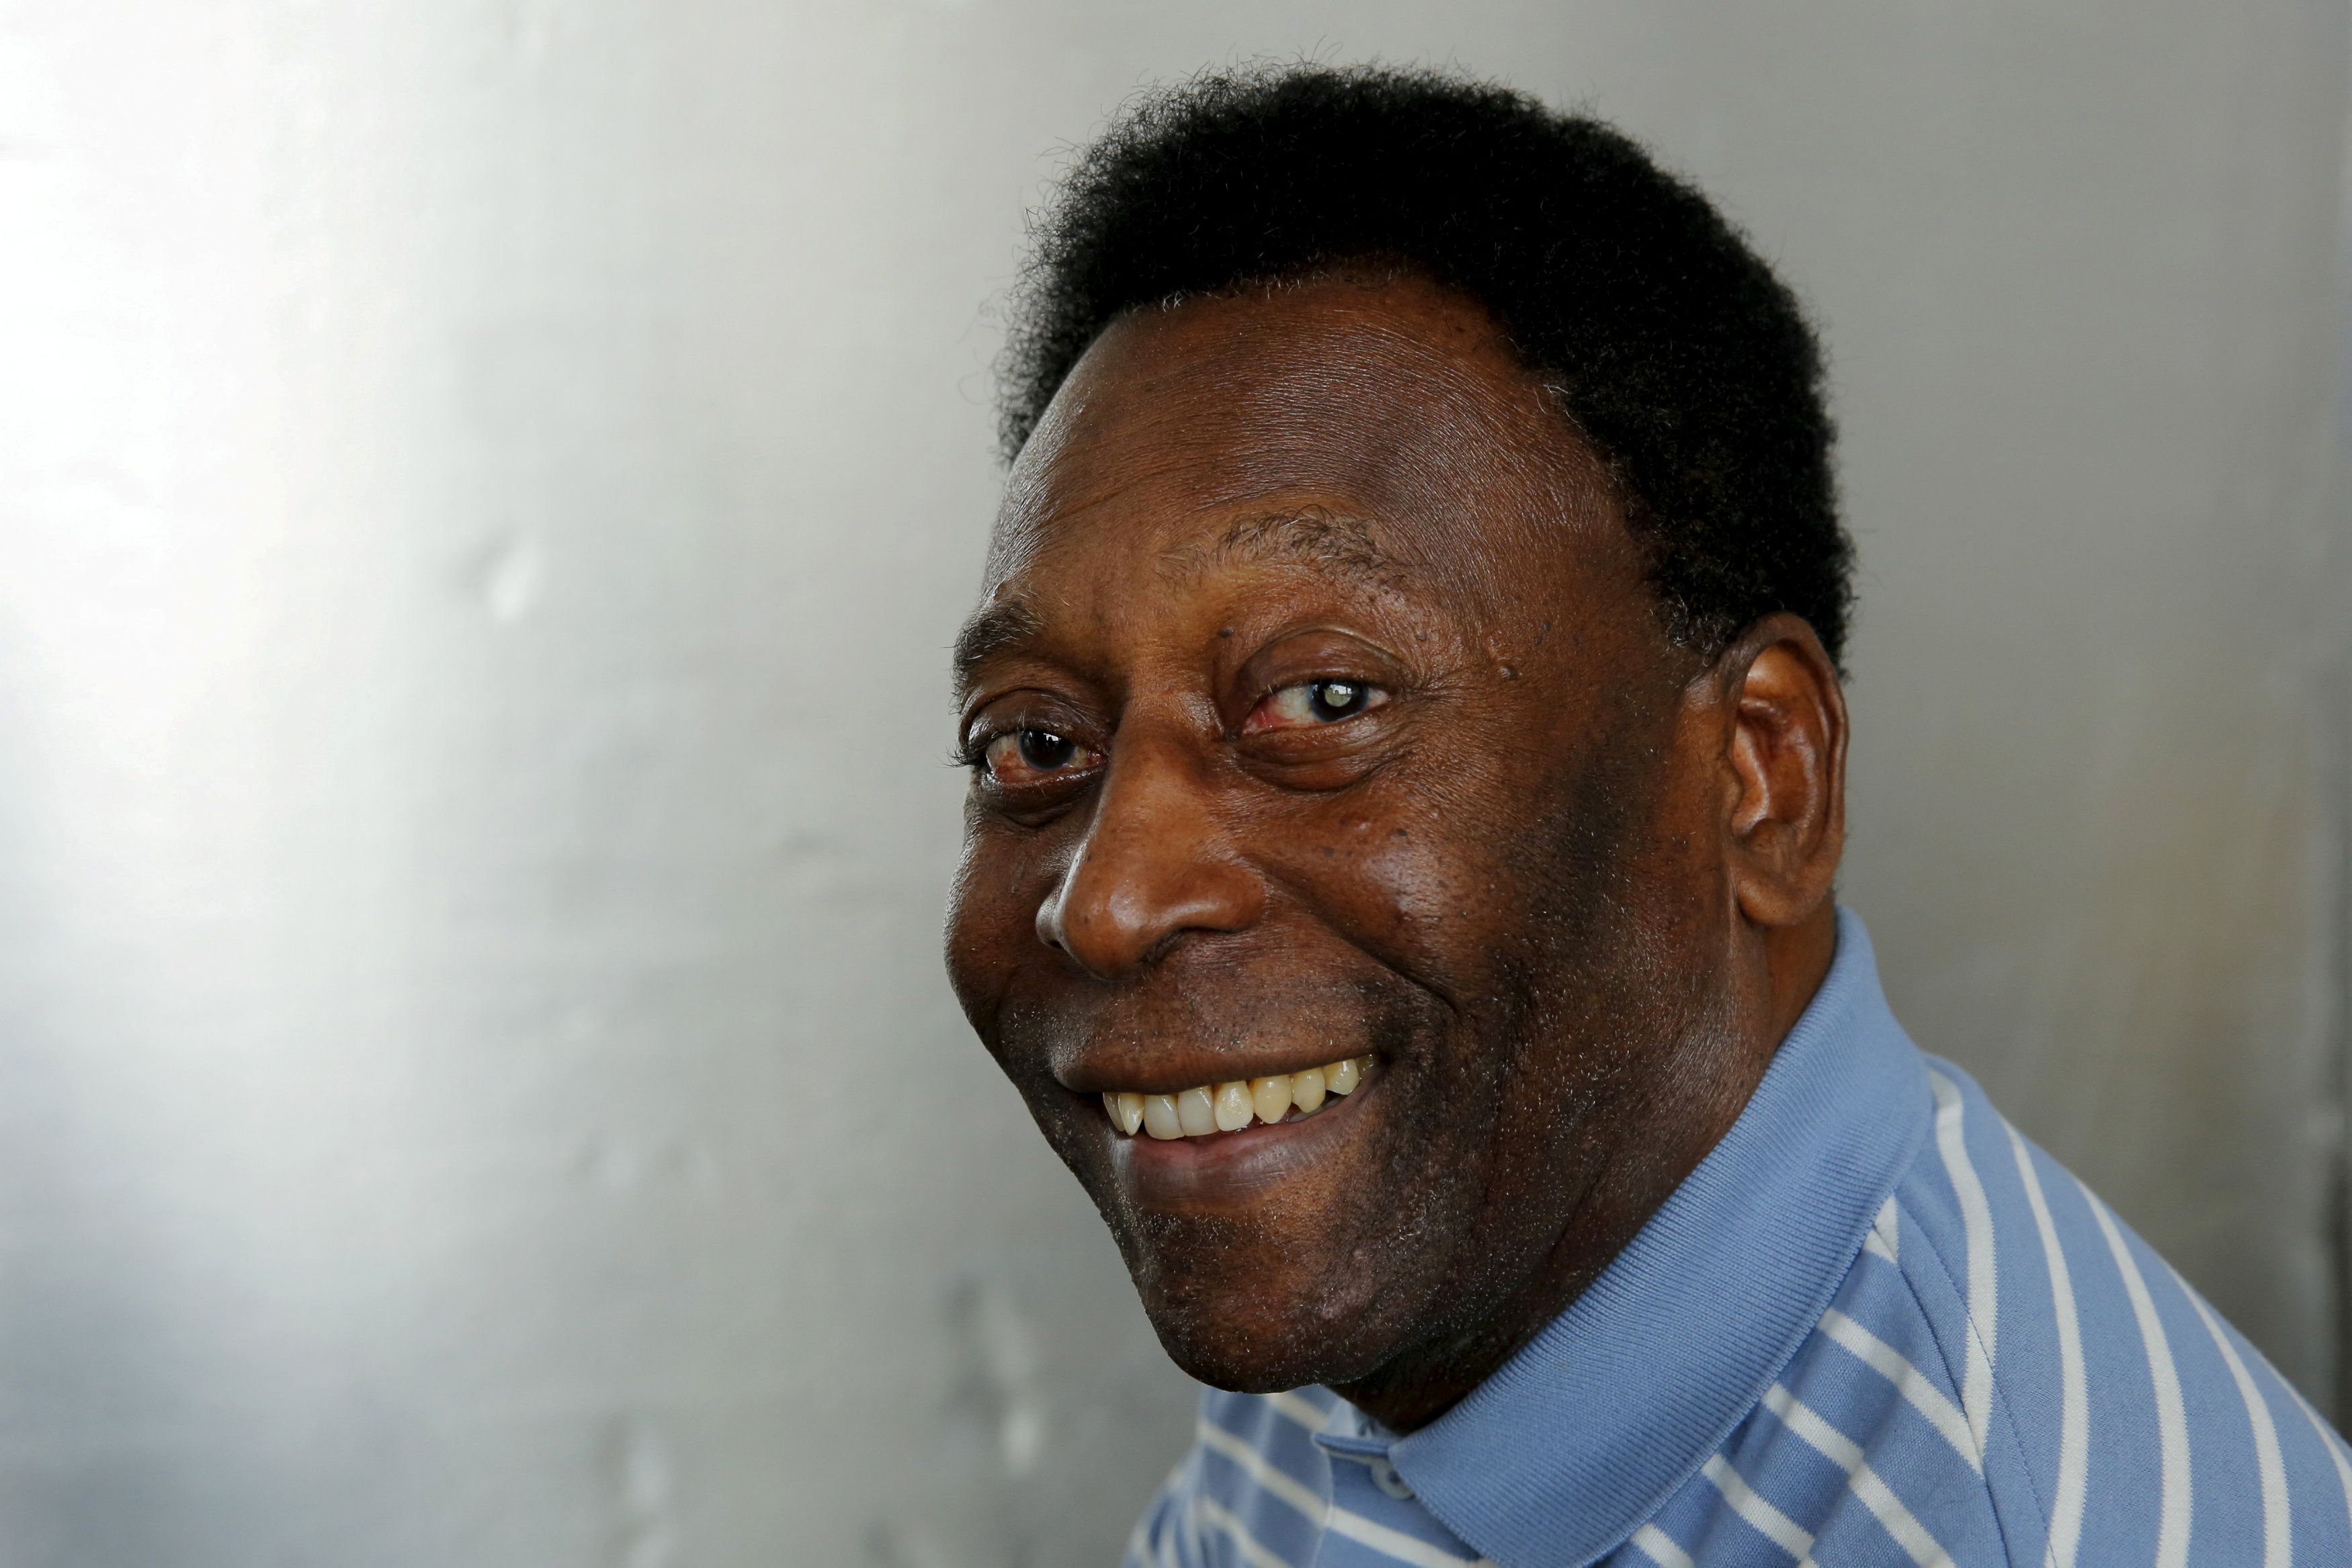 Legendary Brazilian soccer player Pele poses for a portrait during an interview in New York